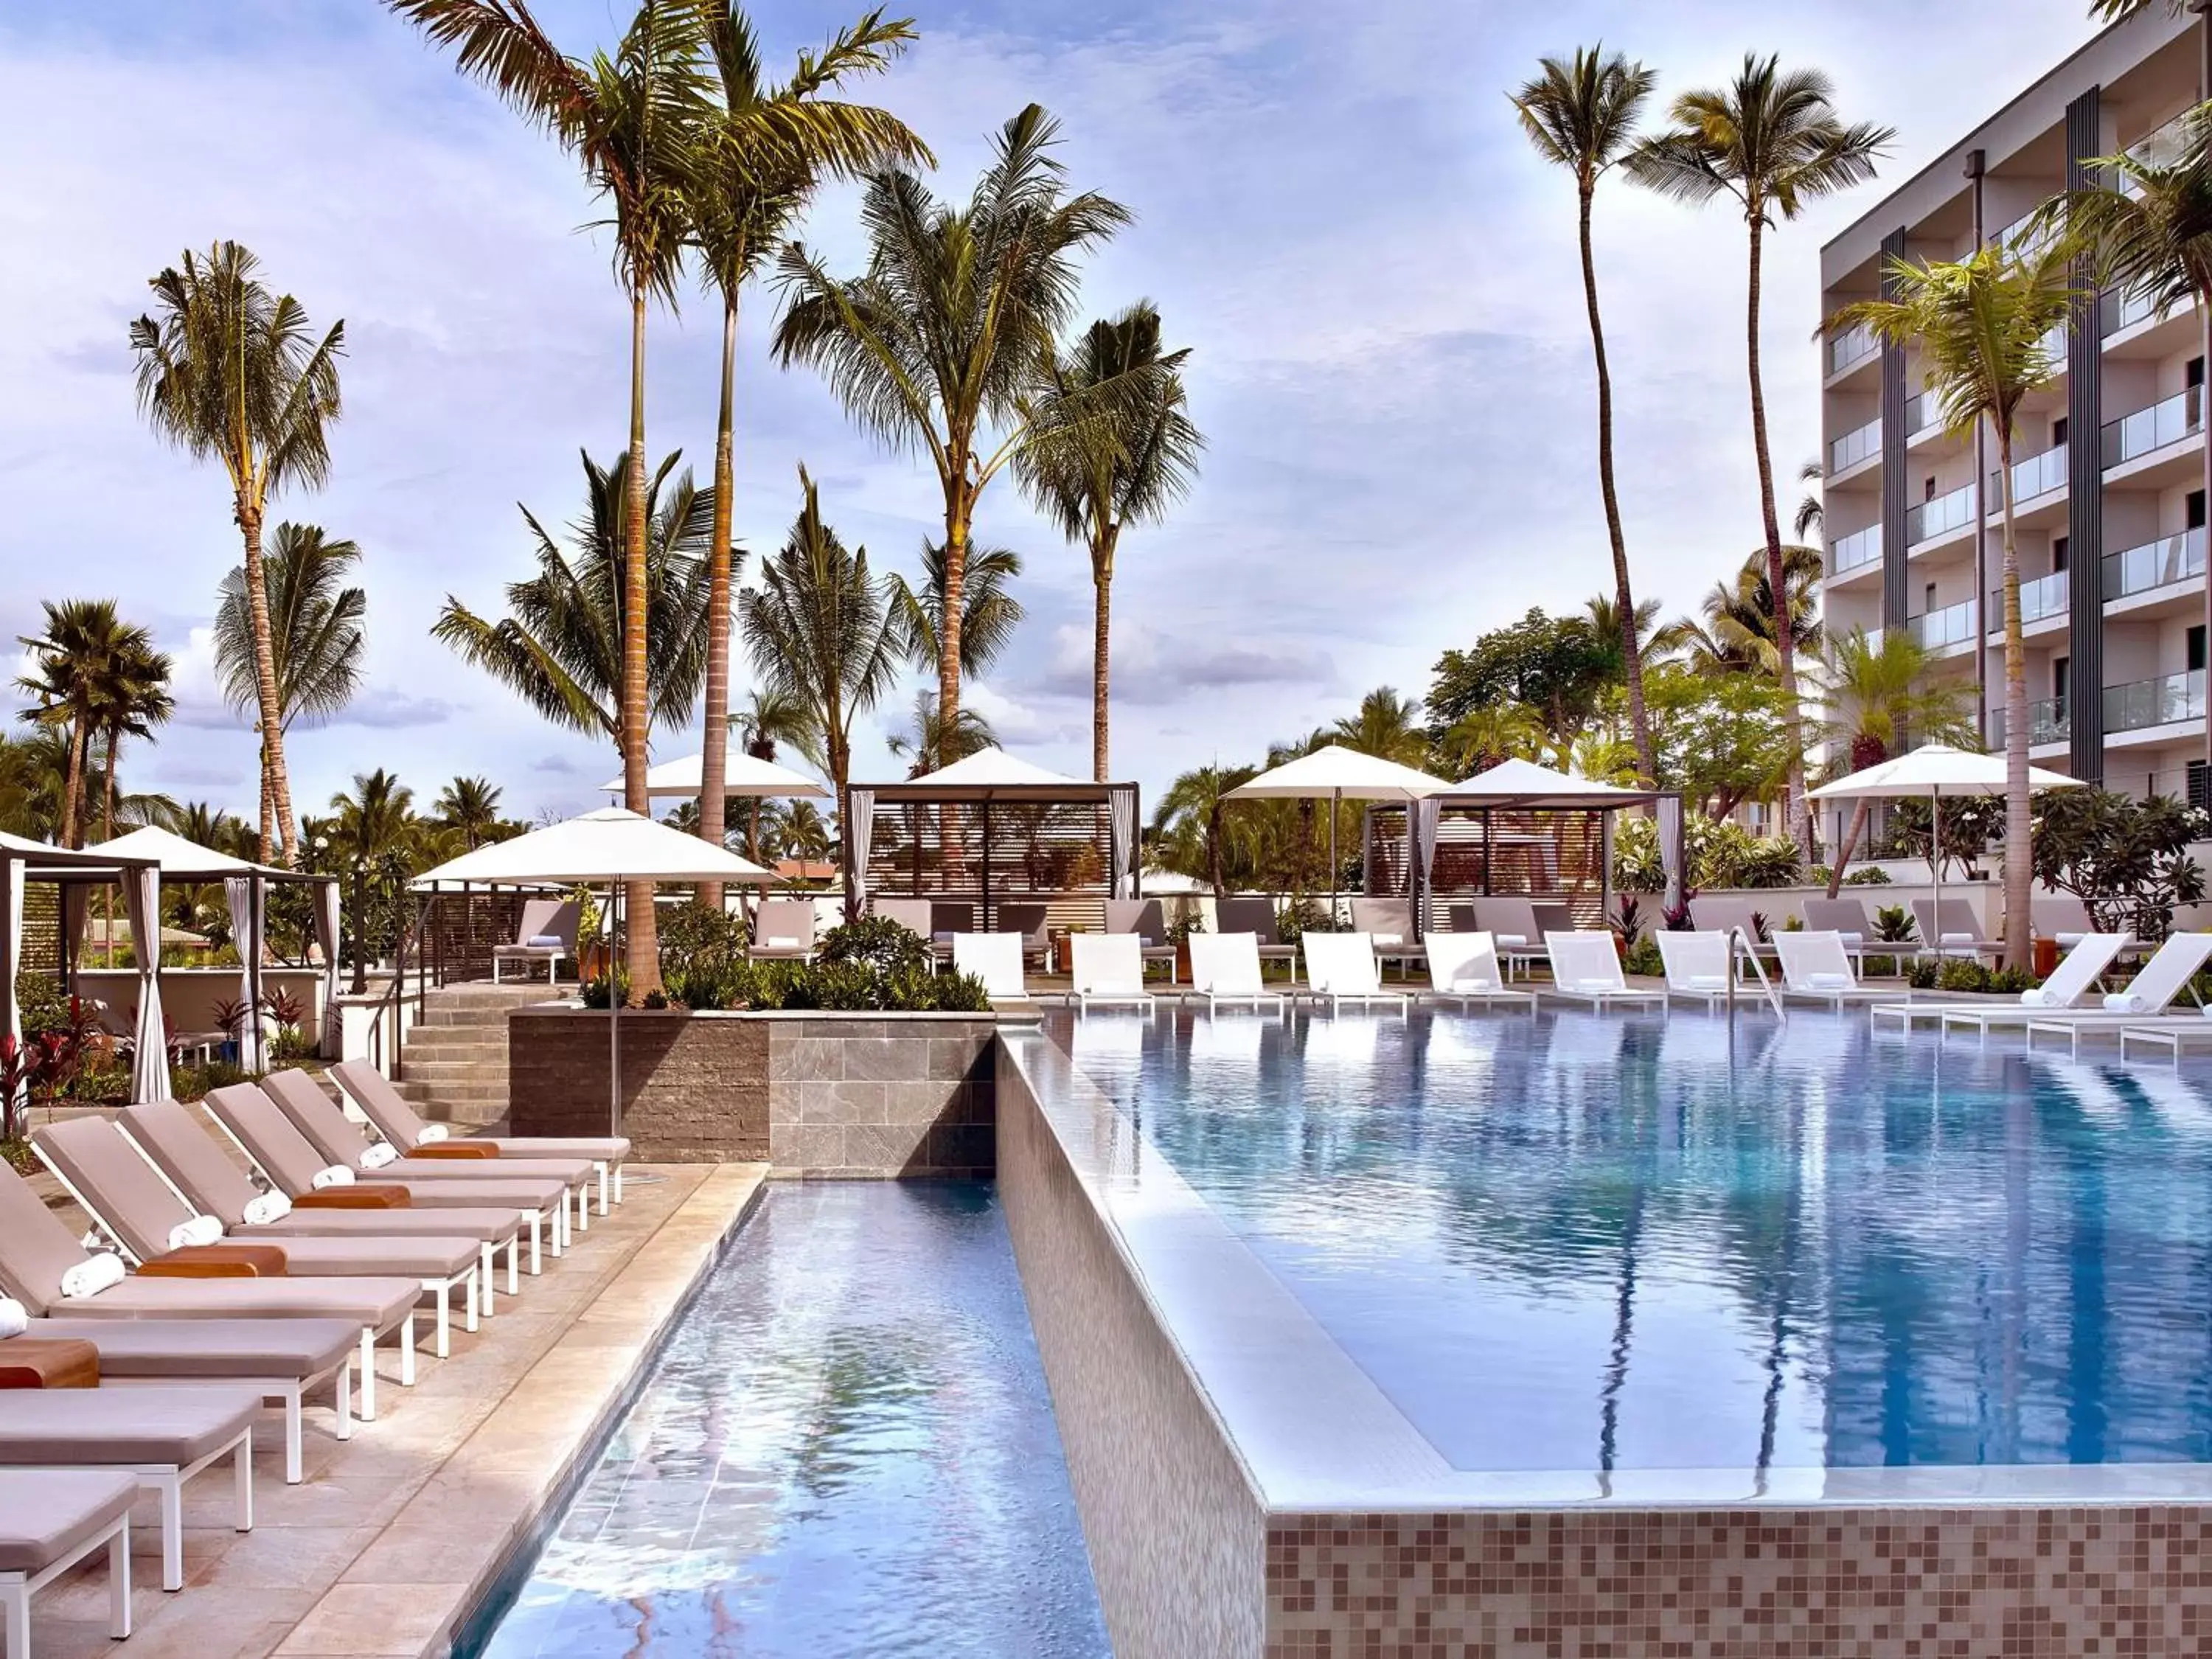 Swimming pool in Andaz Maui at Wailea Resort - A Concept by Hyatt